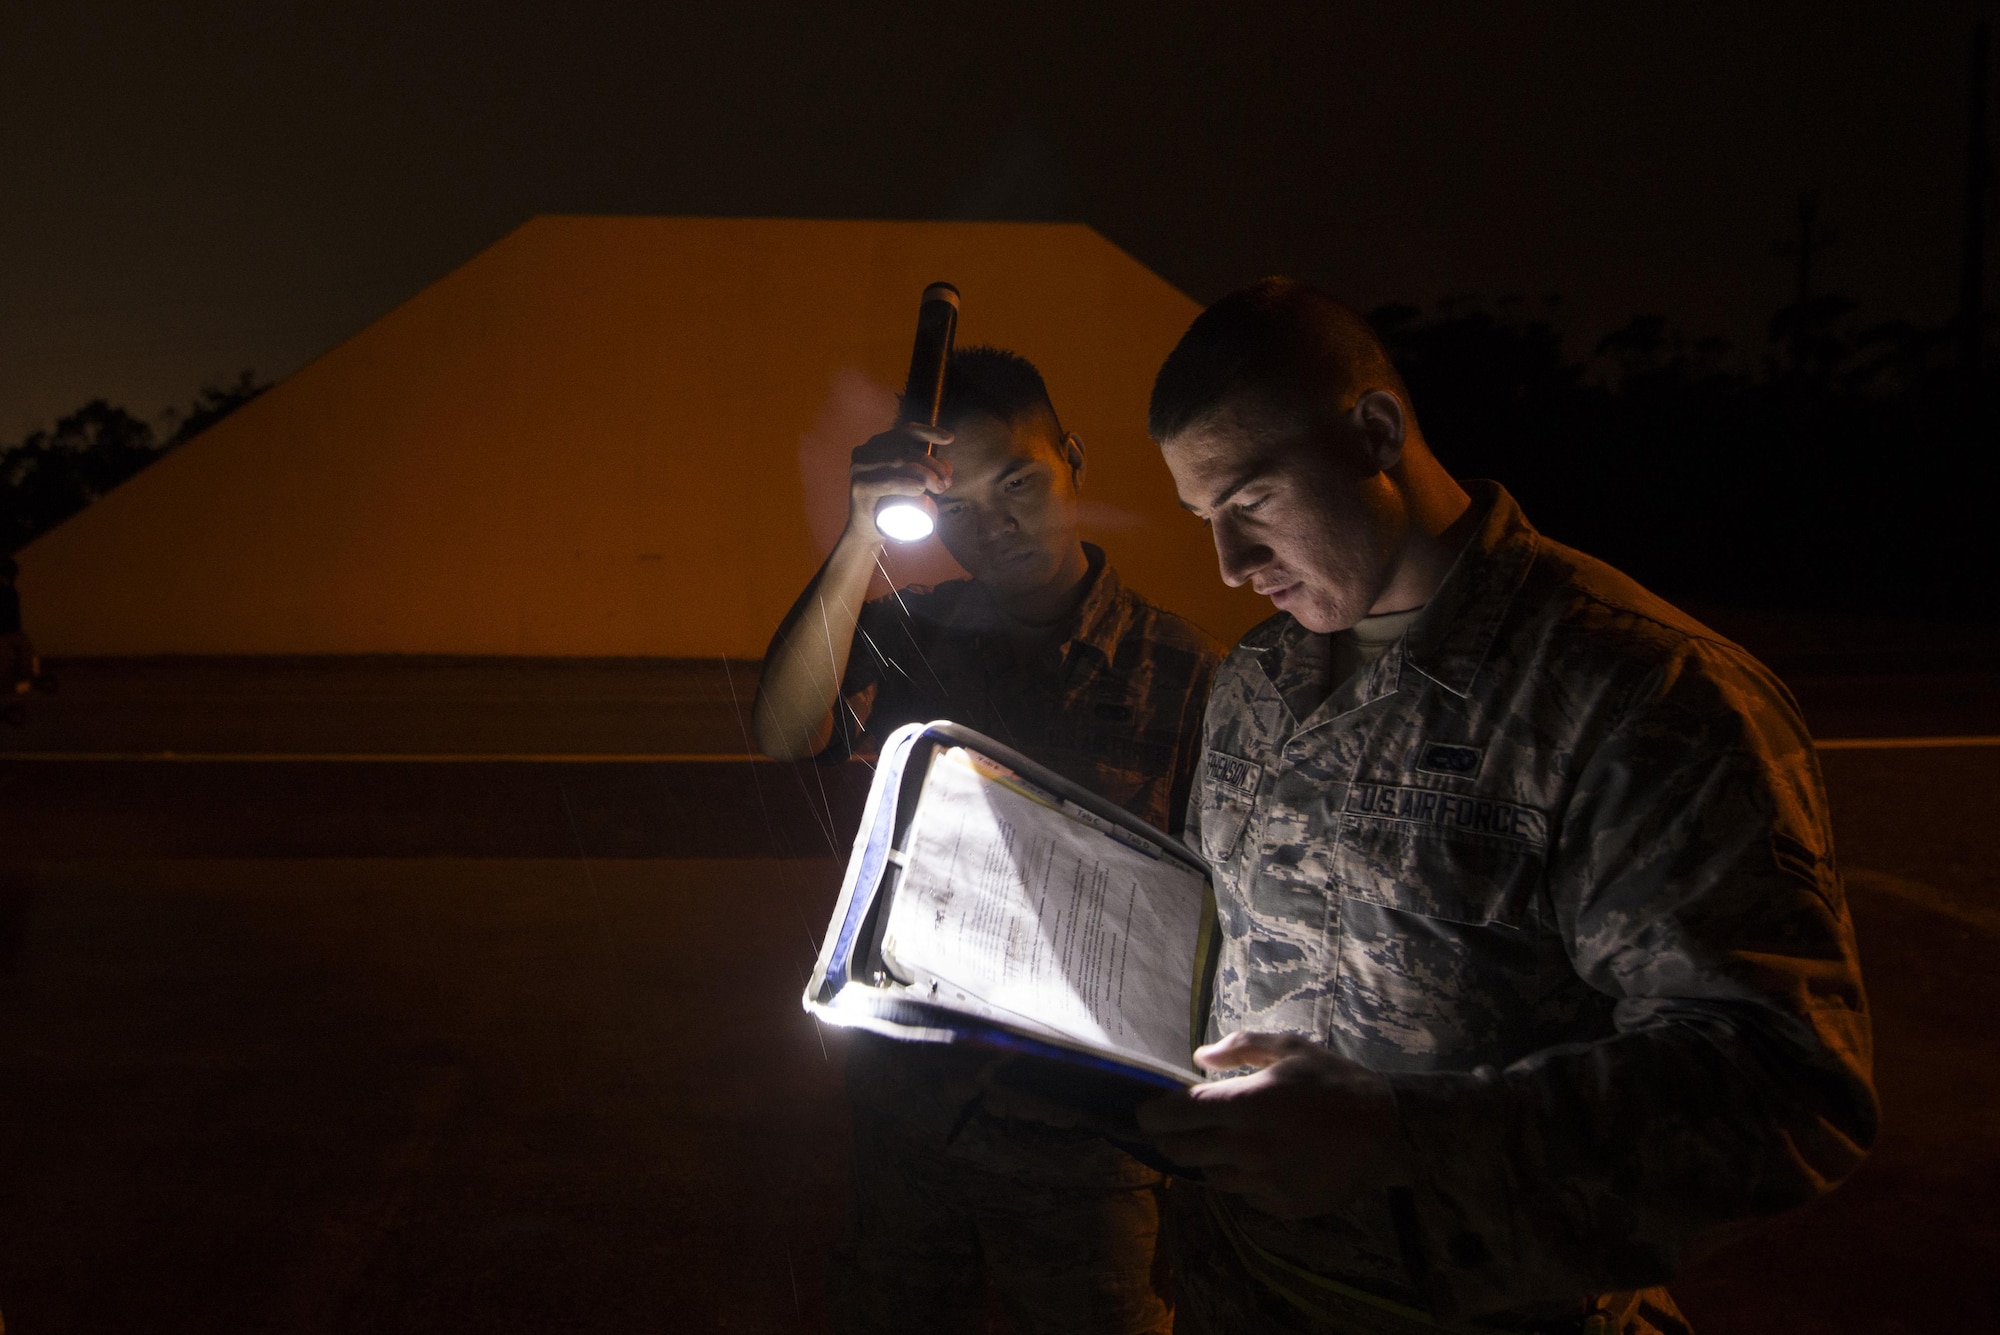 Airman 1st Class Troy Stephenson, 18th Munitions Squadron, reads over safety procedures before preparing to move munitions during a no-notice exercise March 17, 2016, at Kadena Air Base, Japan. 18th MUNS Airmen train like they would fight night or day. (U.S. Air Force photo by Senior Airman Omari Bernard/Released)